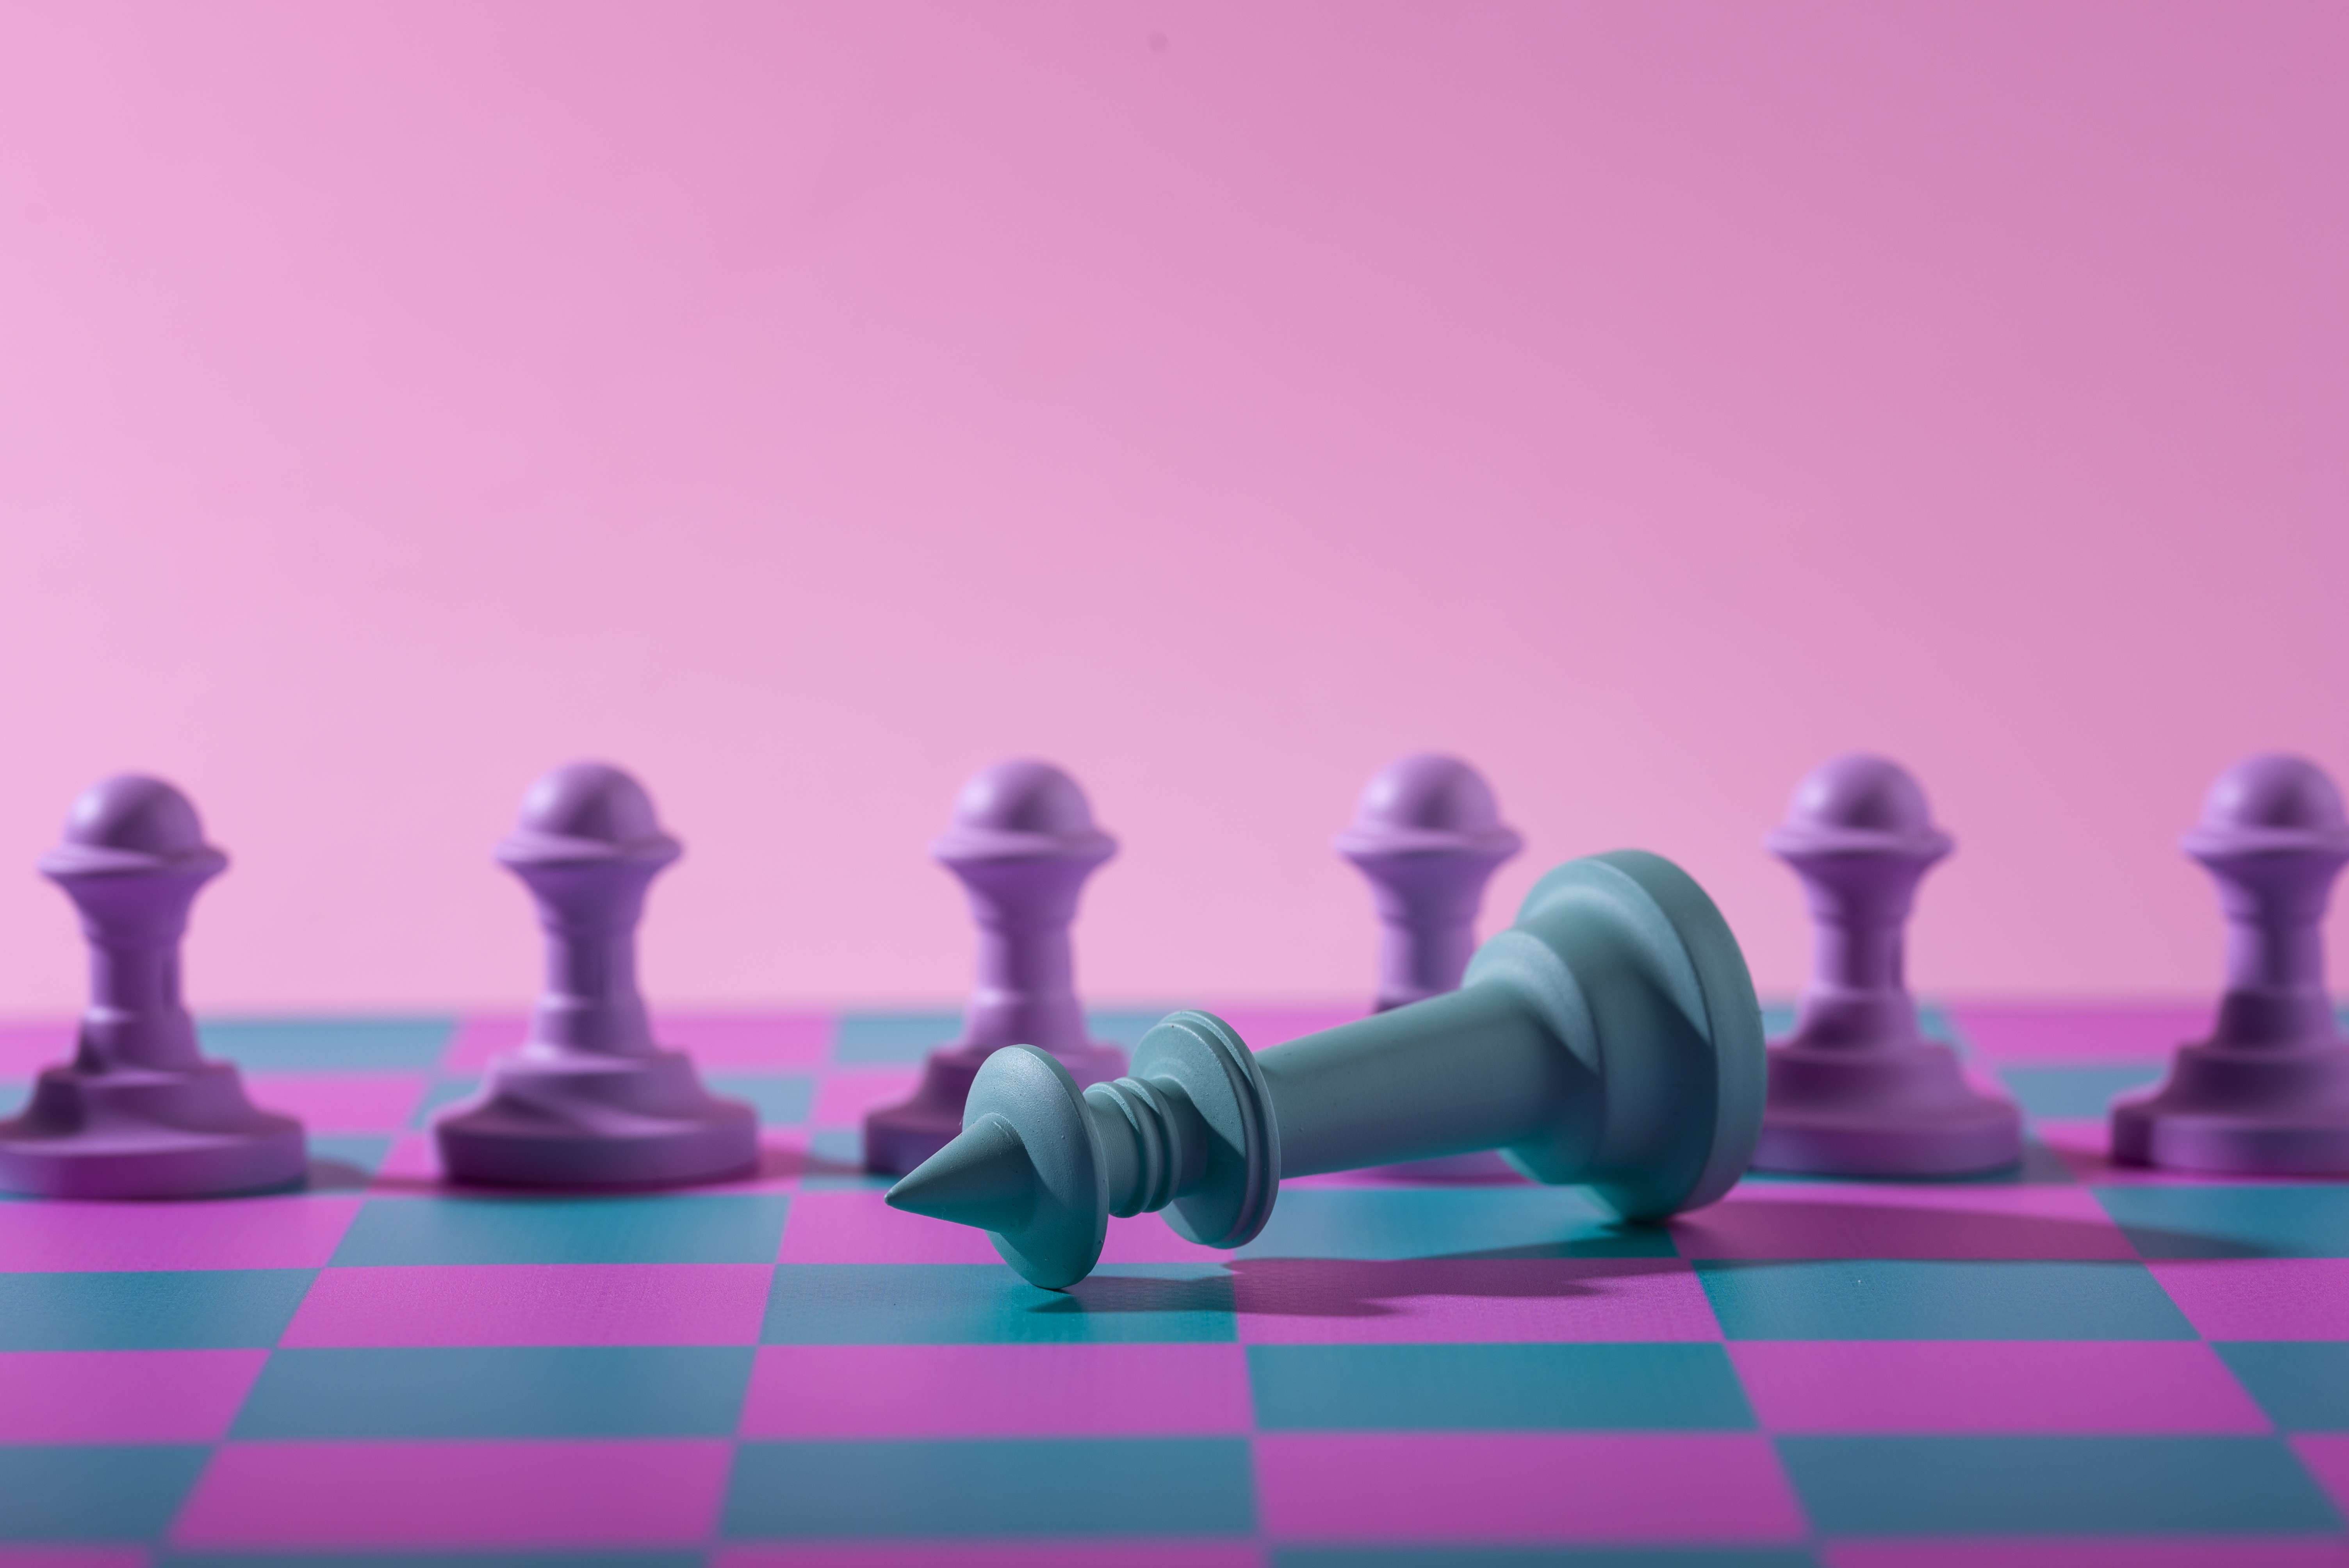 The Competitive Techscape: Dispelling the Monopoly Narrative Featured Image